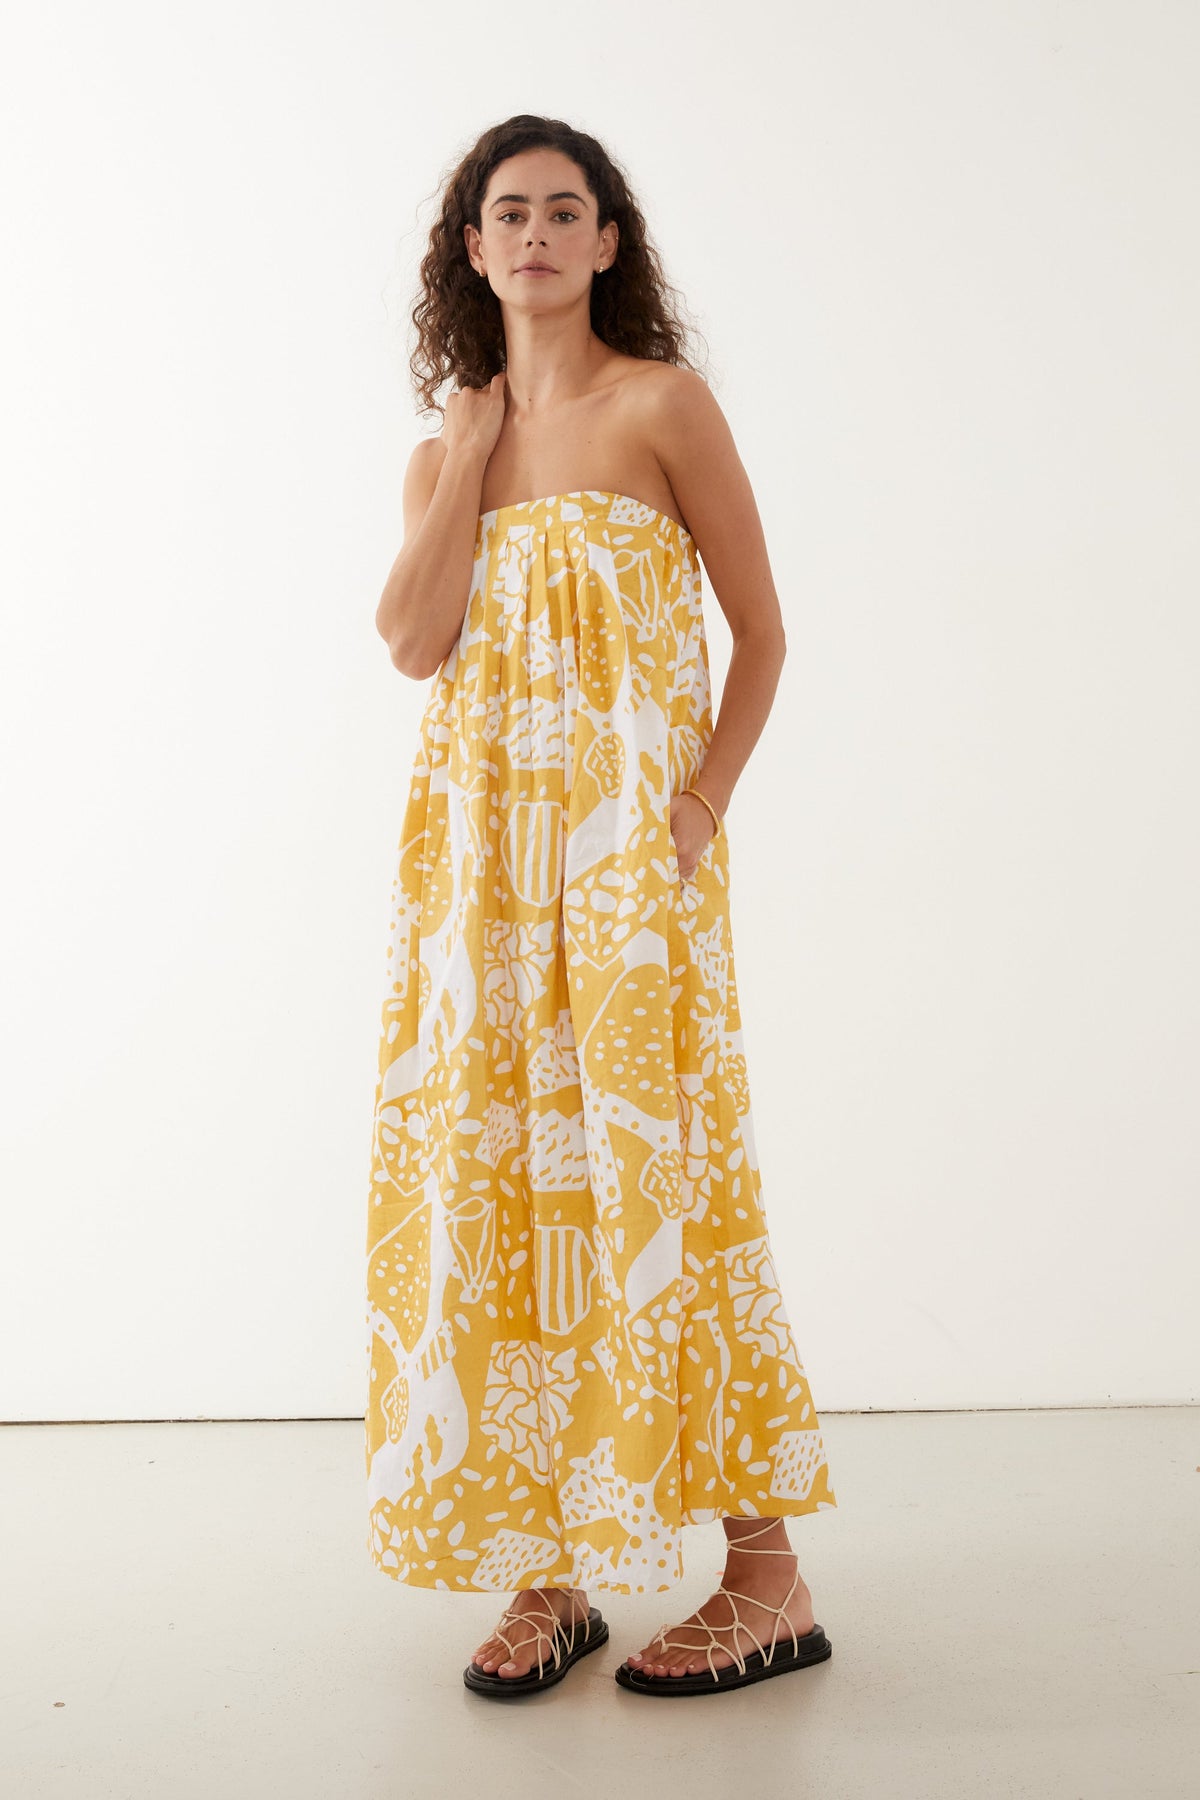 strapless midi summer dress in white and yellow bold print